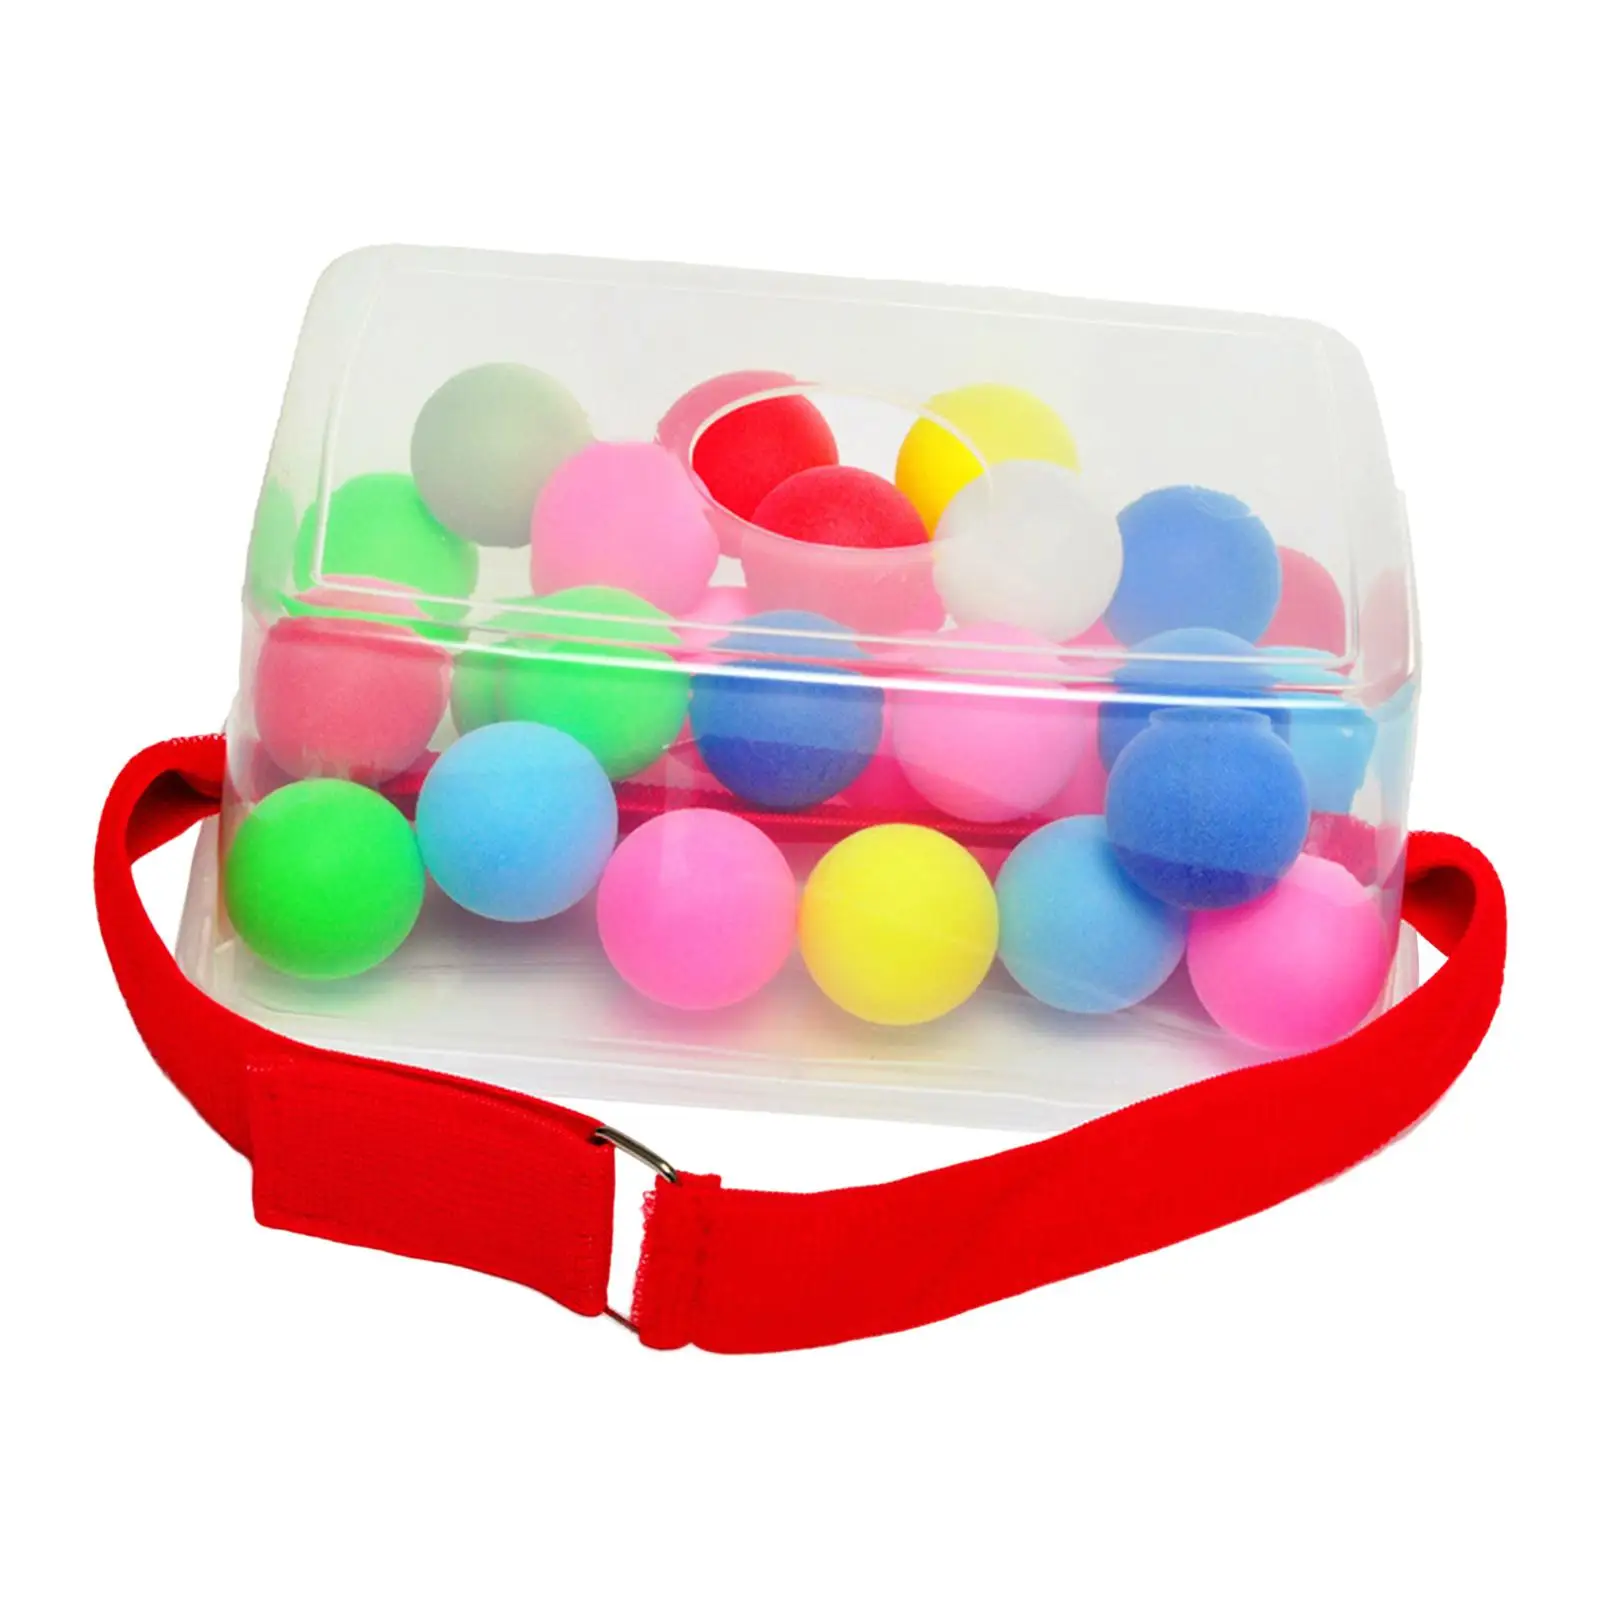 Shaking Swing Balls Game set Competition Toys Kids Party Games Swing Balls Game with 30 Ball for Party Game Outdoors Adults Kids